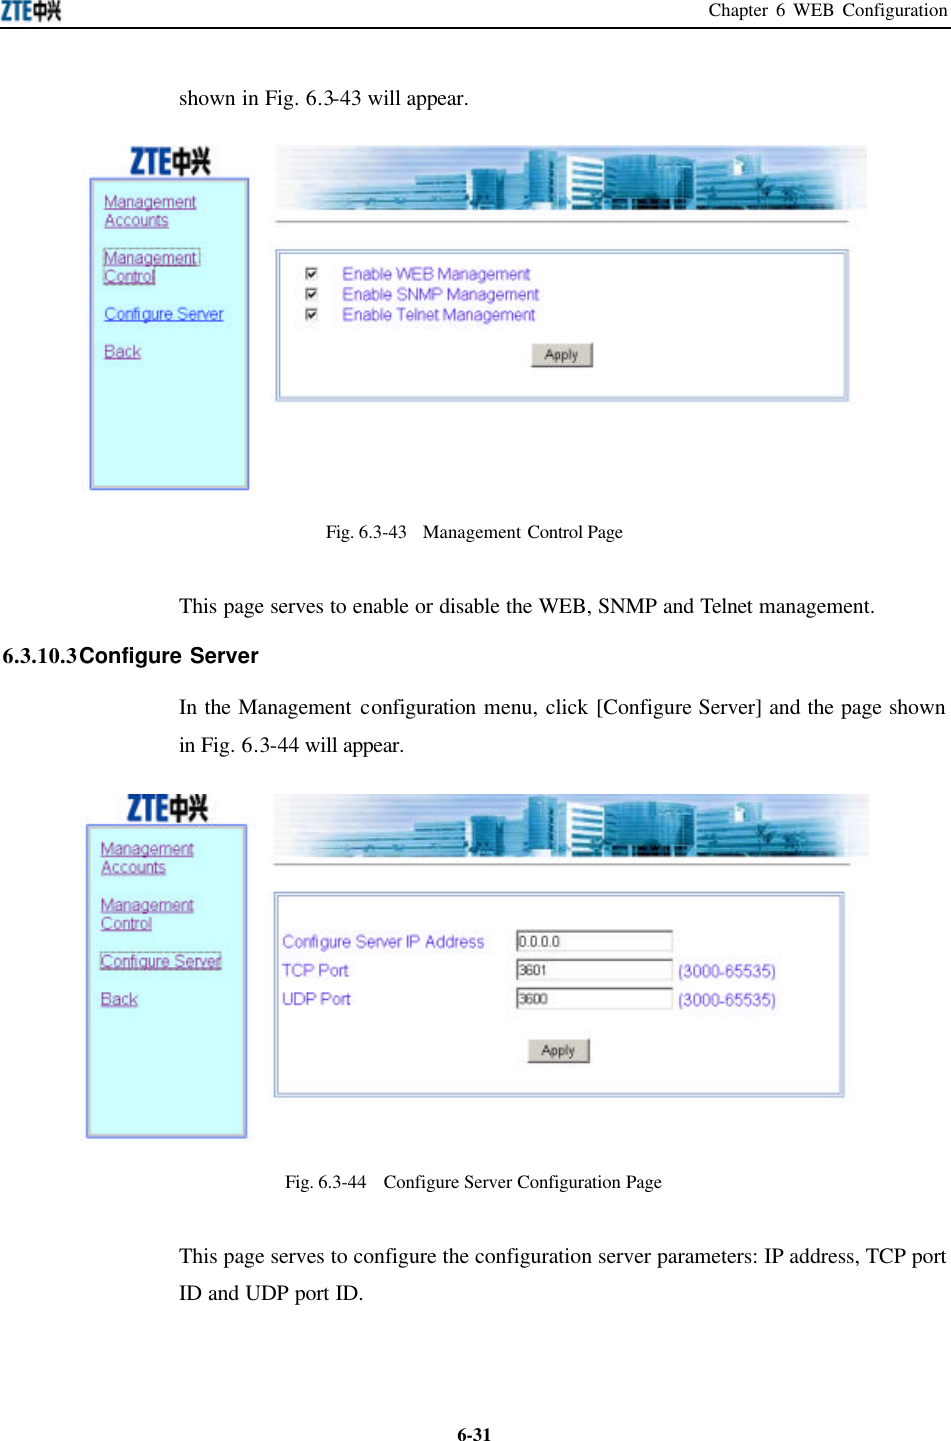 Chapter 6 WEB Configuration  6-31shown in Fig. 6.3-43 will appear.    Fig. 6.3-43  Management Control Page This page serves to enable or disable the WEB, SNMP and Telnet management.   6.3.10.3 Configure Server In the Management configuration menu, click [Configure Server] and the page shown in Fig. 6.3-44 will appear.    Fig. 6.3-44  Configure Server Configuration Page This page serves to configure the configuration server parameters: IP address, TCP port ID and UDP port ID.   